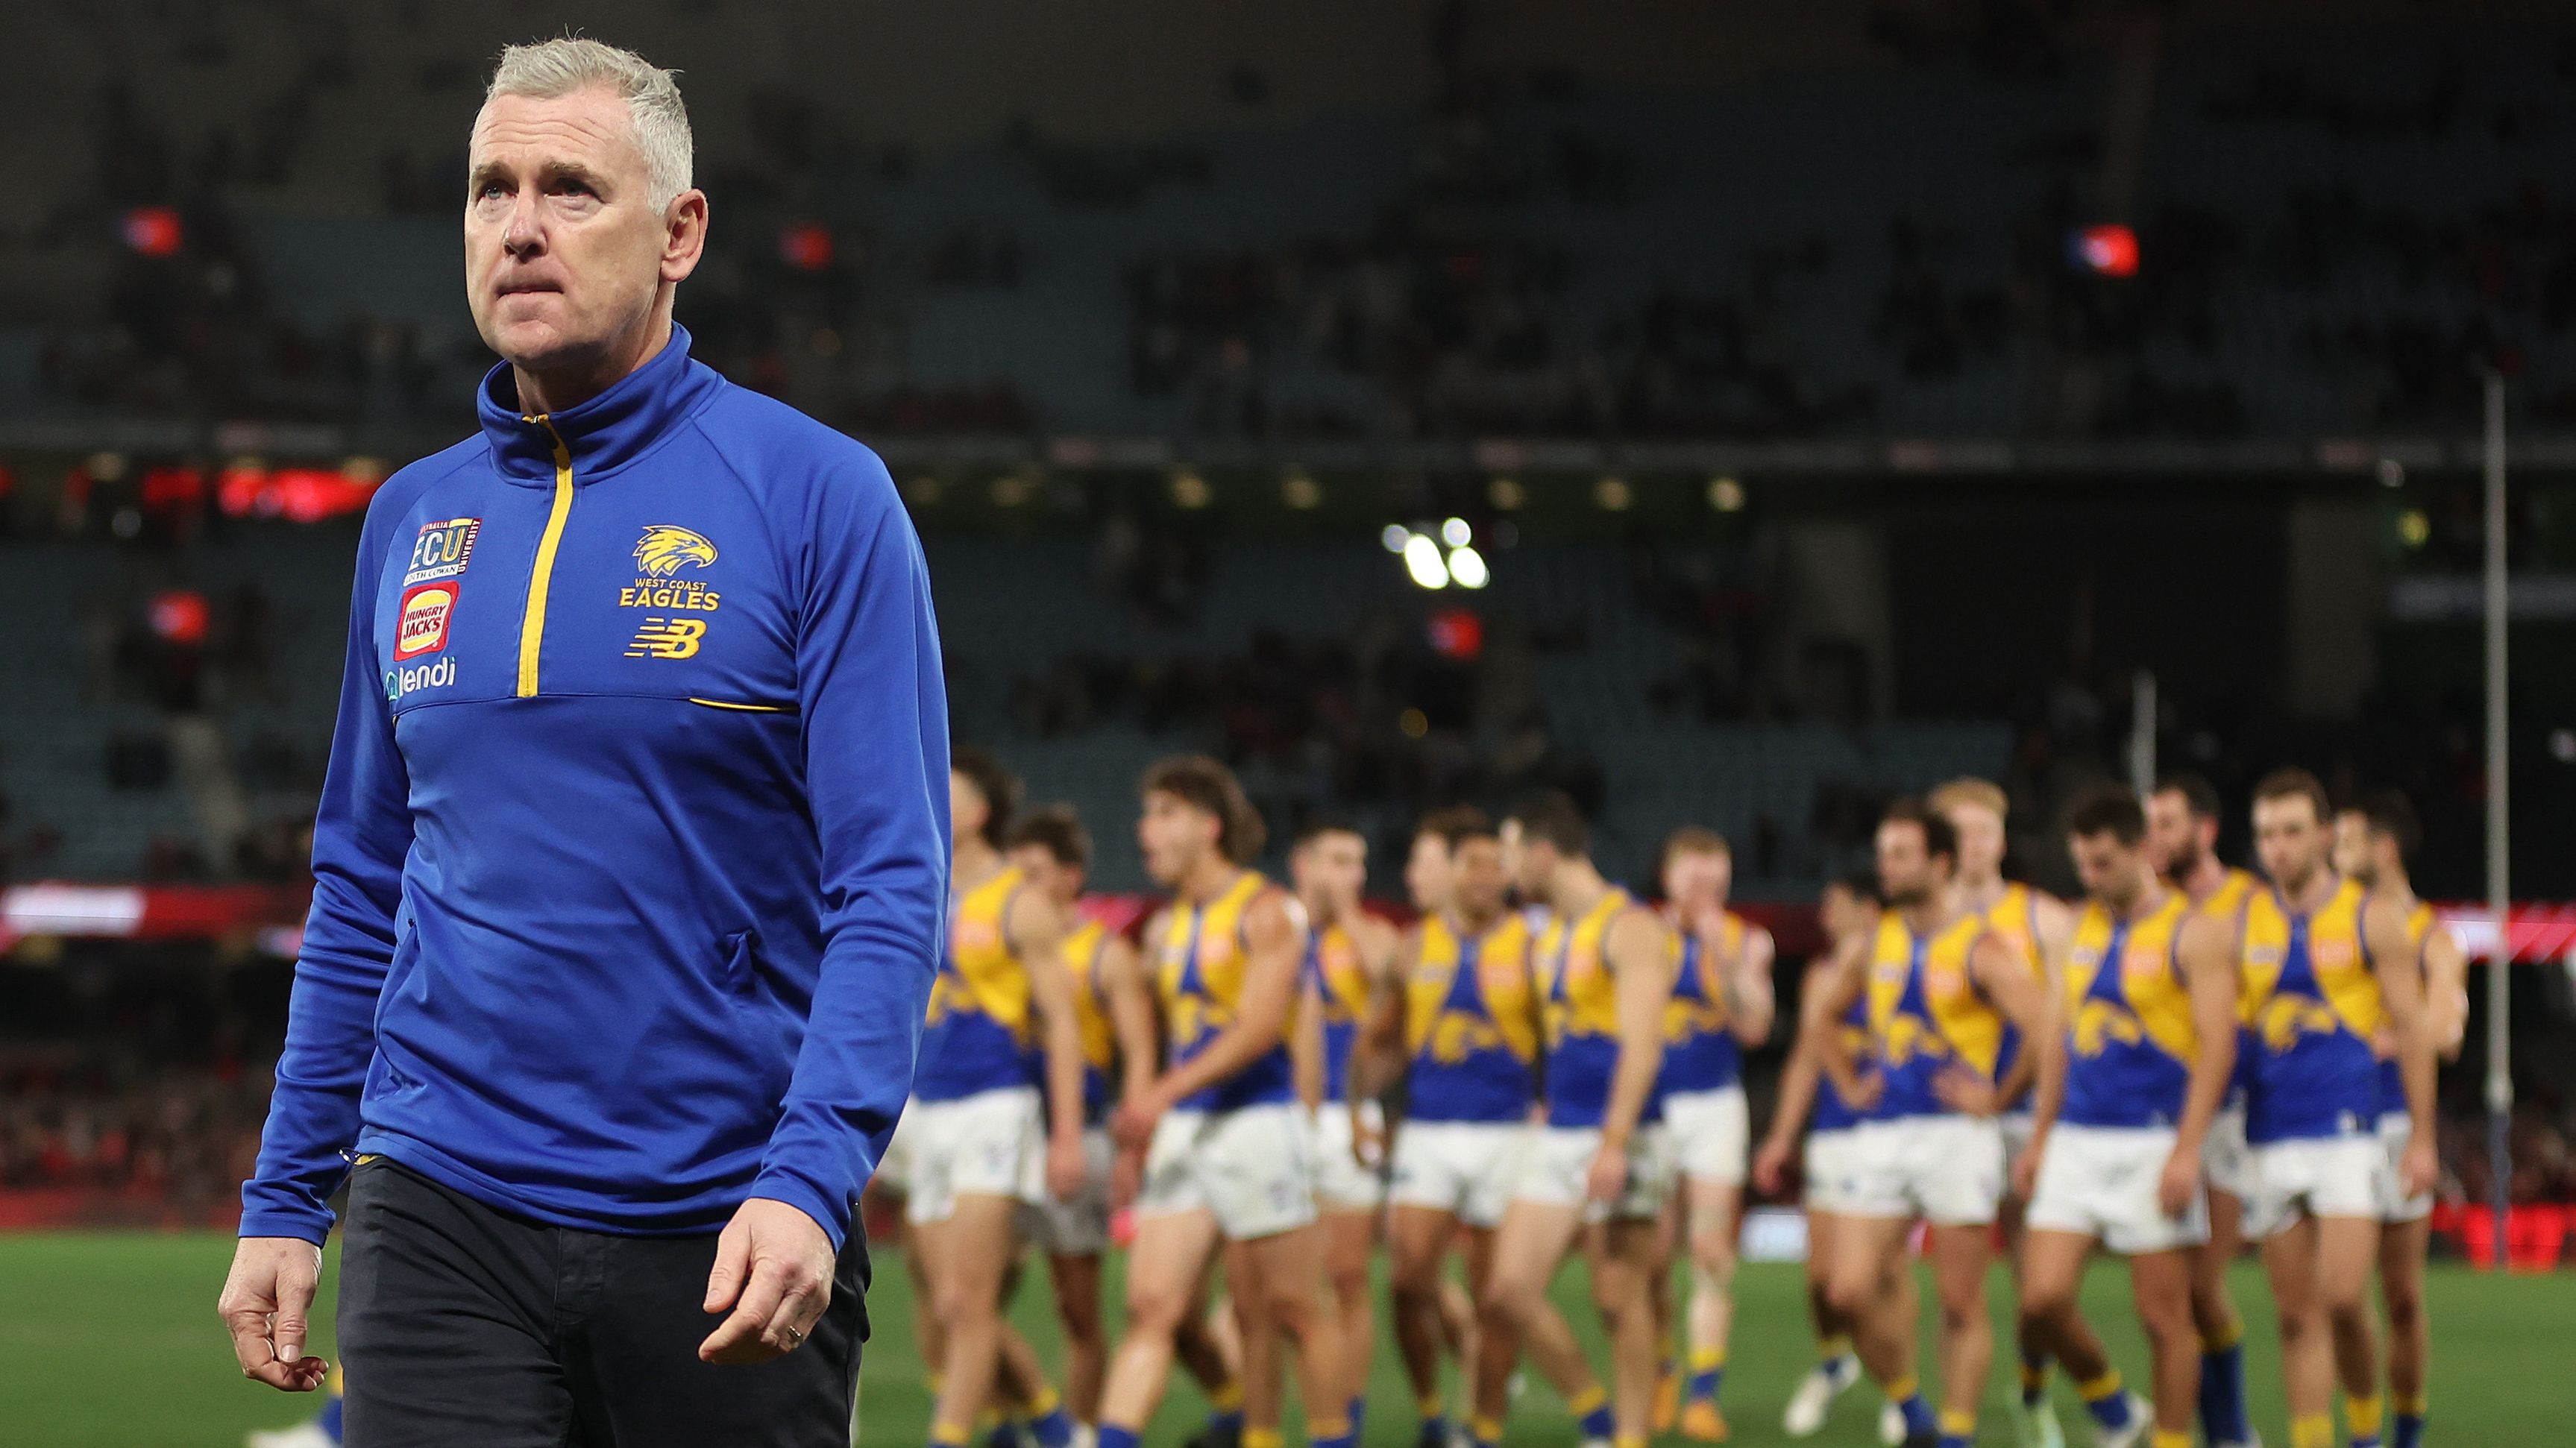 MELBOURNE, AUSTRALIA - AUGUST 05: Eagles coach Adam Simpson walks off after the Eagles were defeated by the Bombers during the round 21 AFL match between Essendon Bombers and West Coast Eagles at Marvel Stadium, on August 05, 2023, in Melbourne, Australia. (Photo by Robert Cianflone/Getty Images)